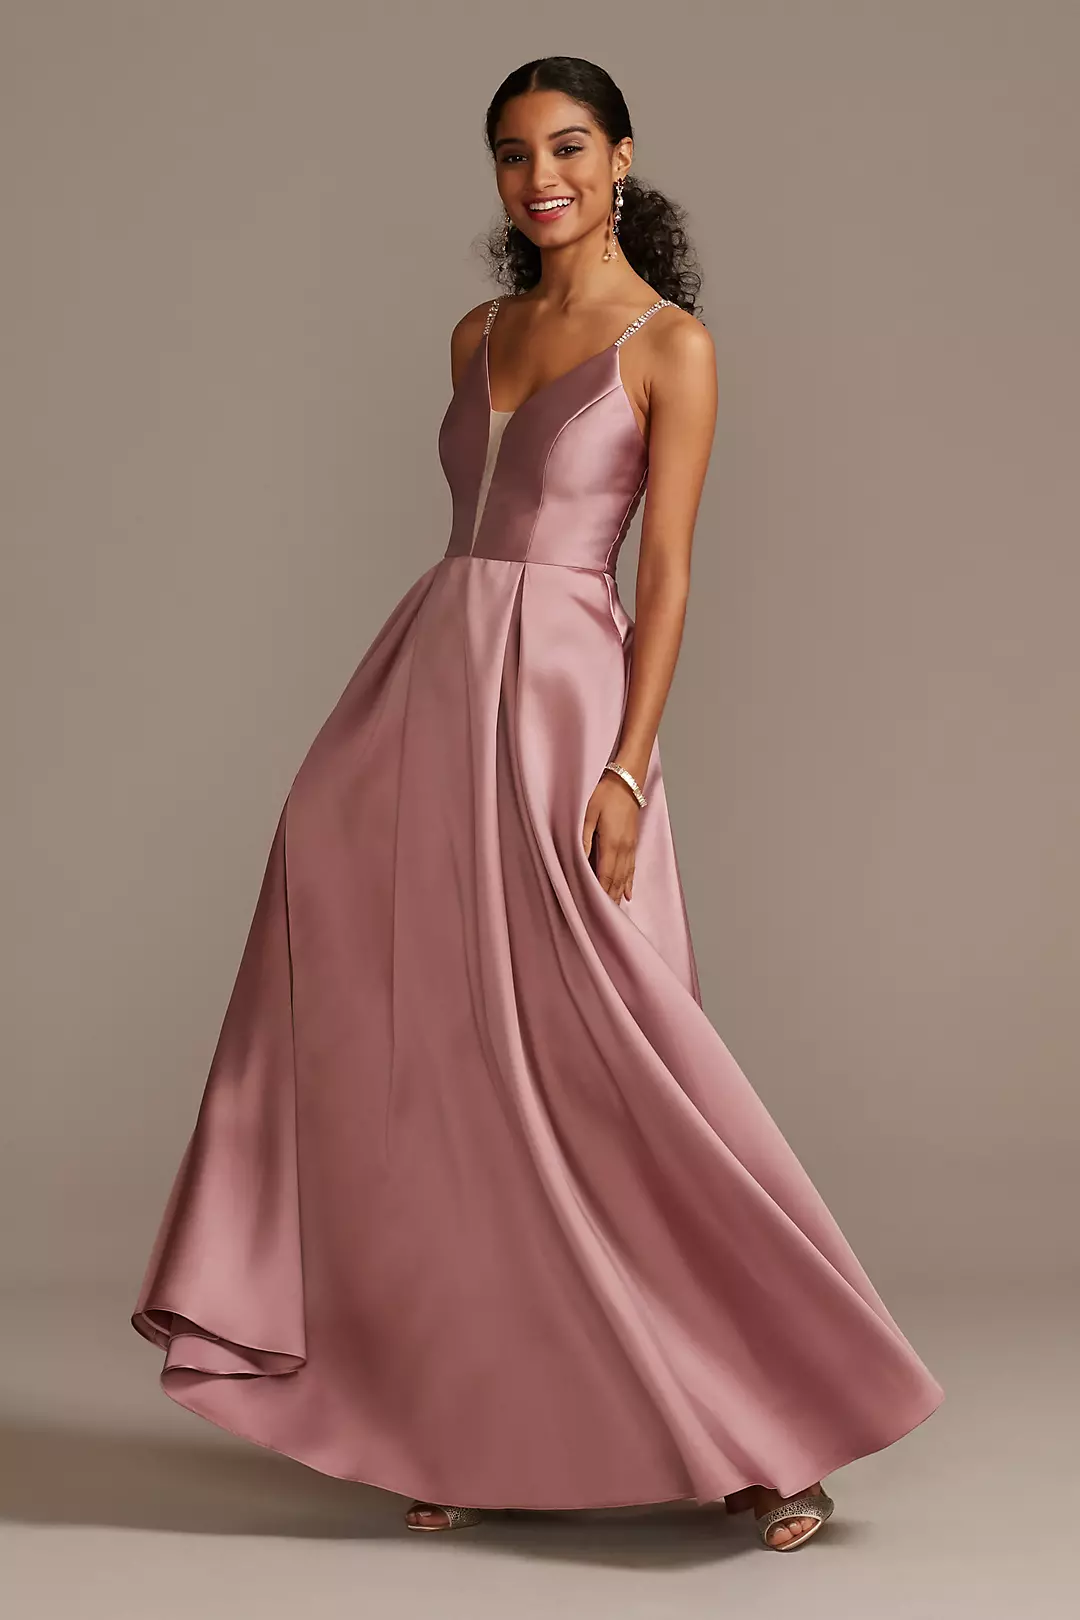 Satin Ball Gown with Deep-V Illusion Mesh Inset Image